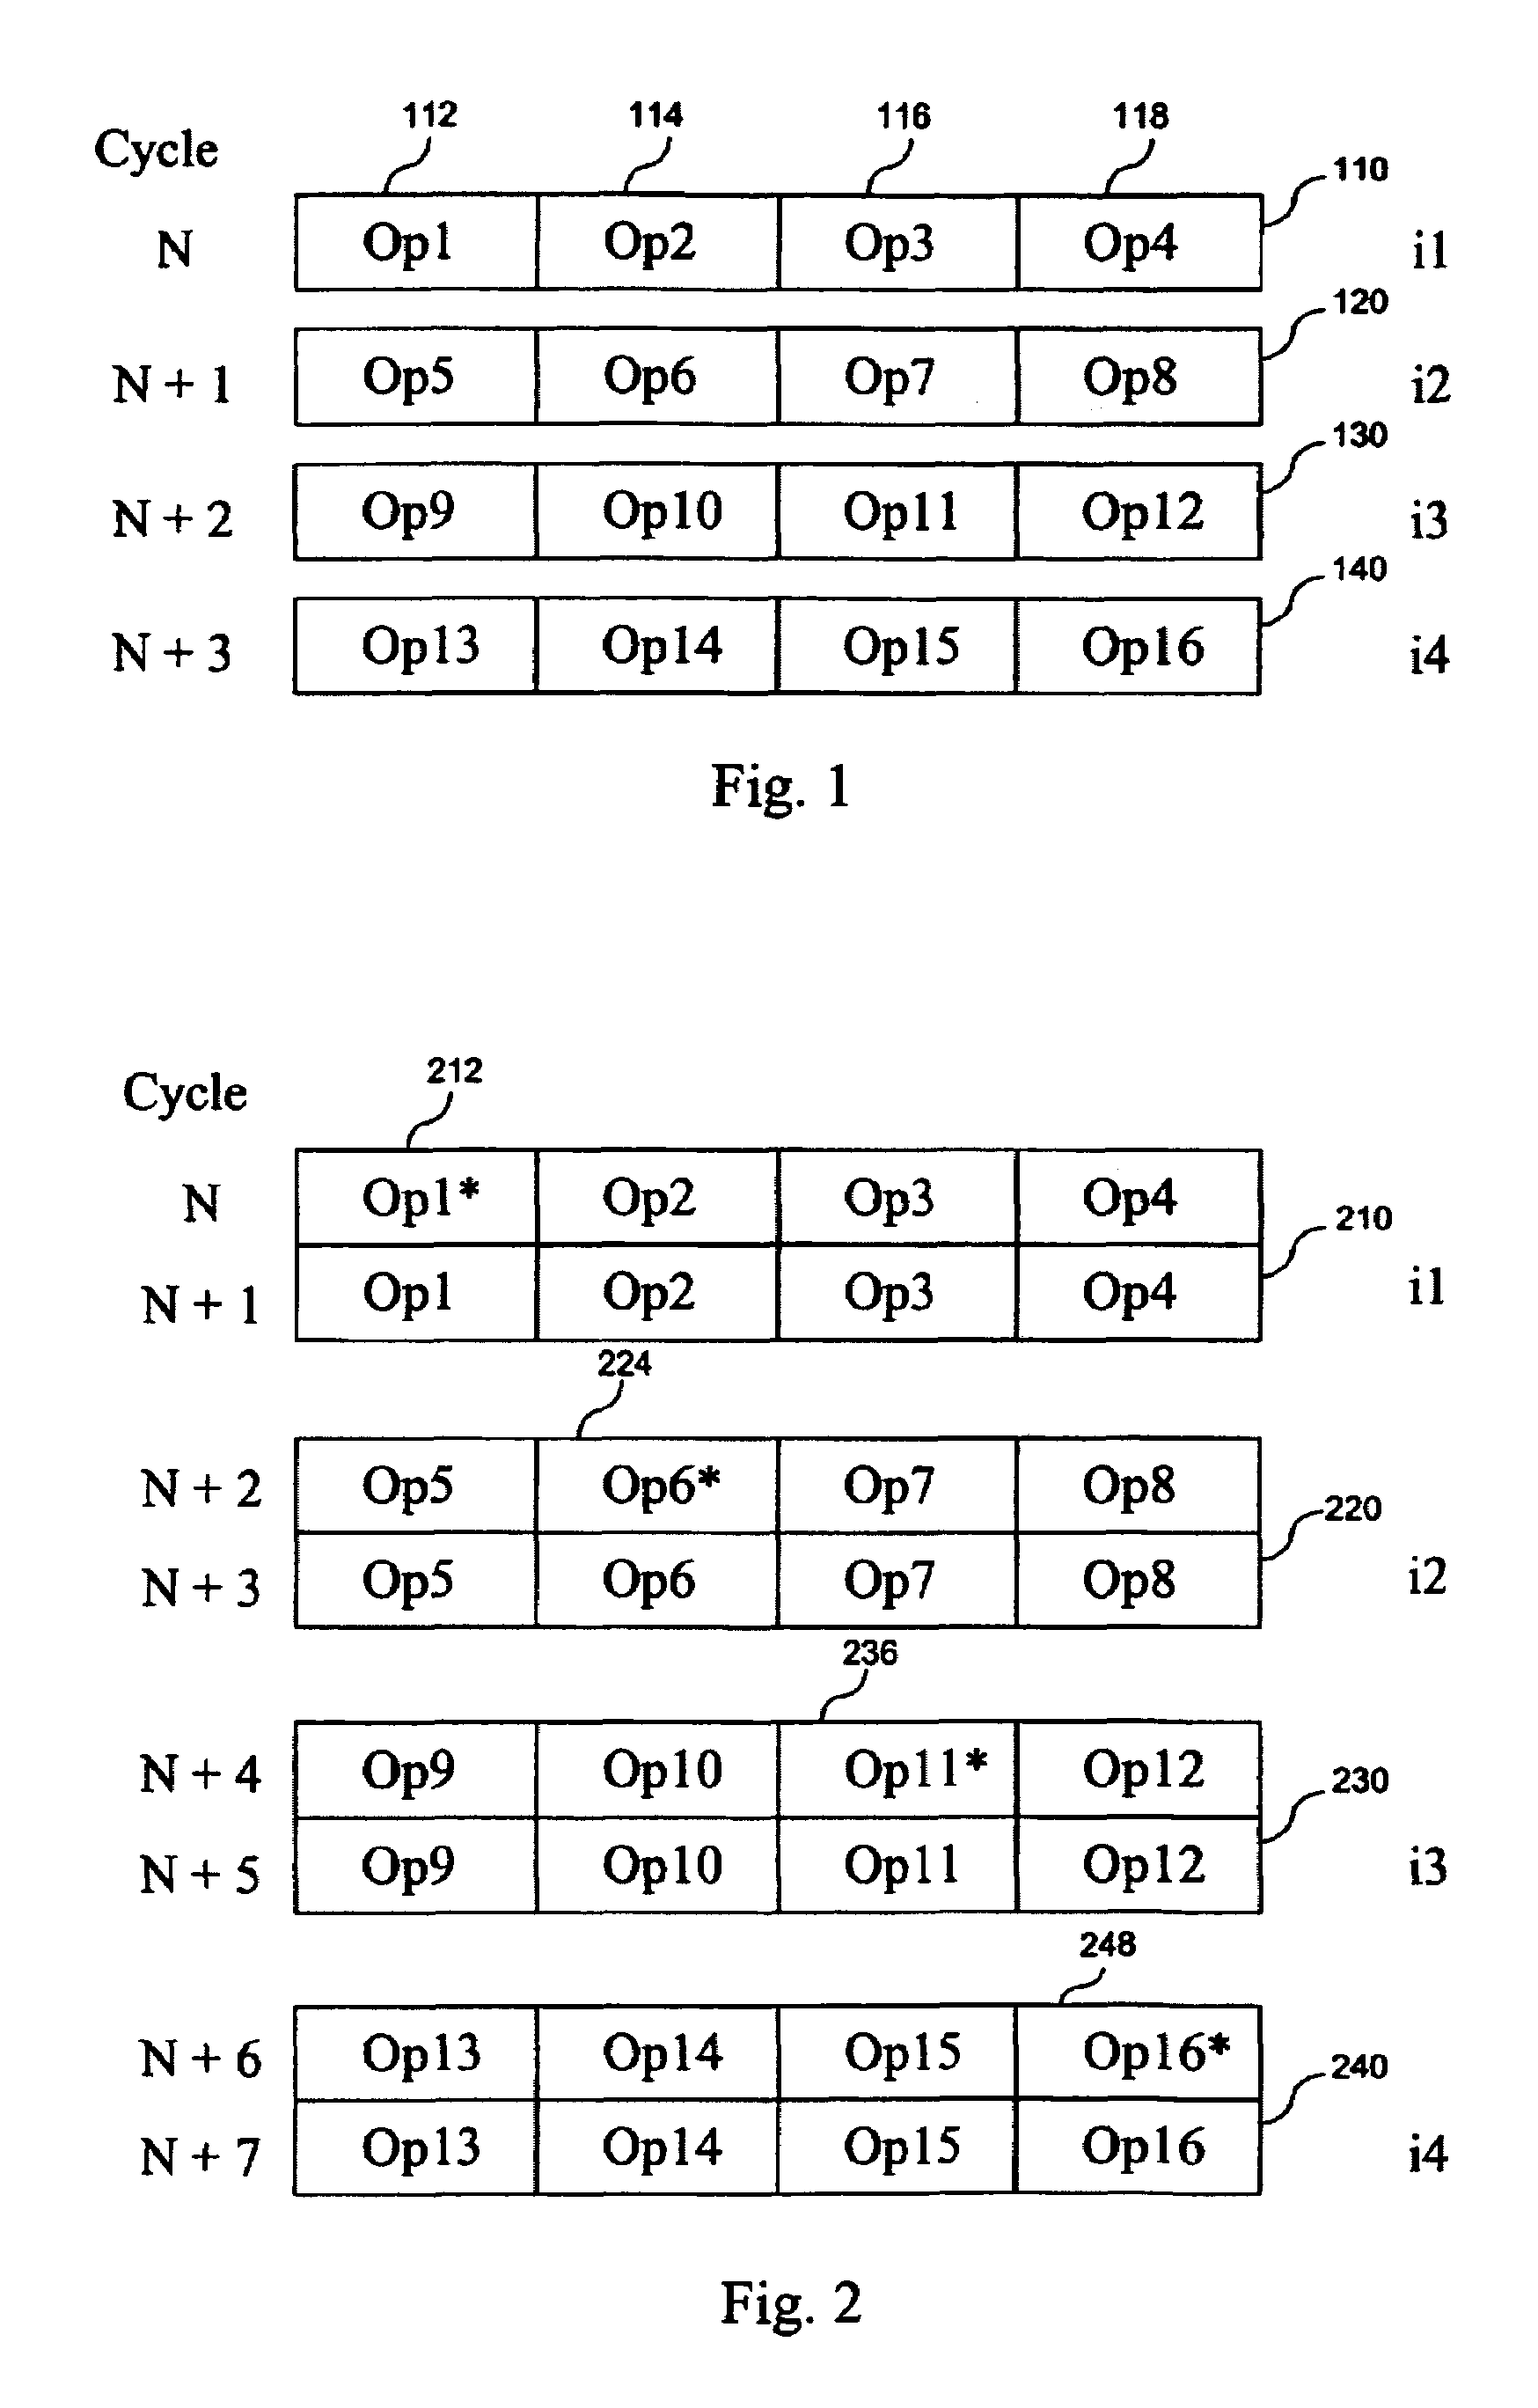 Single-chip multiprocessor with cycle-precise program scheduling of parallel execution